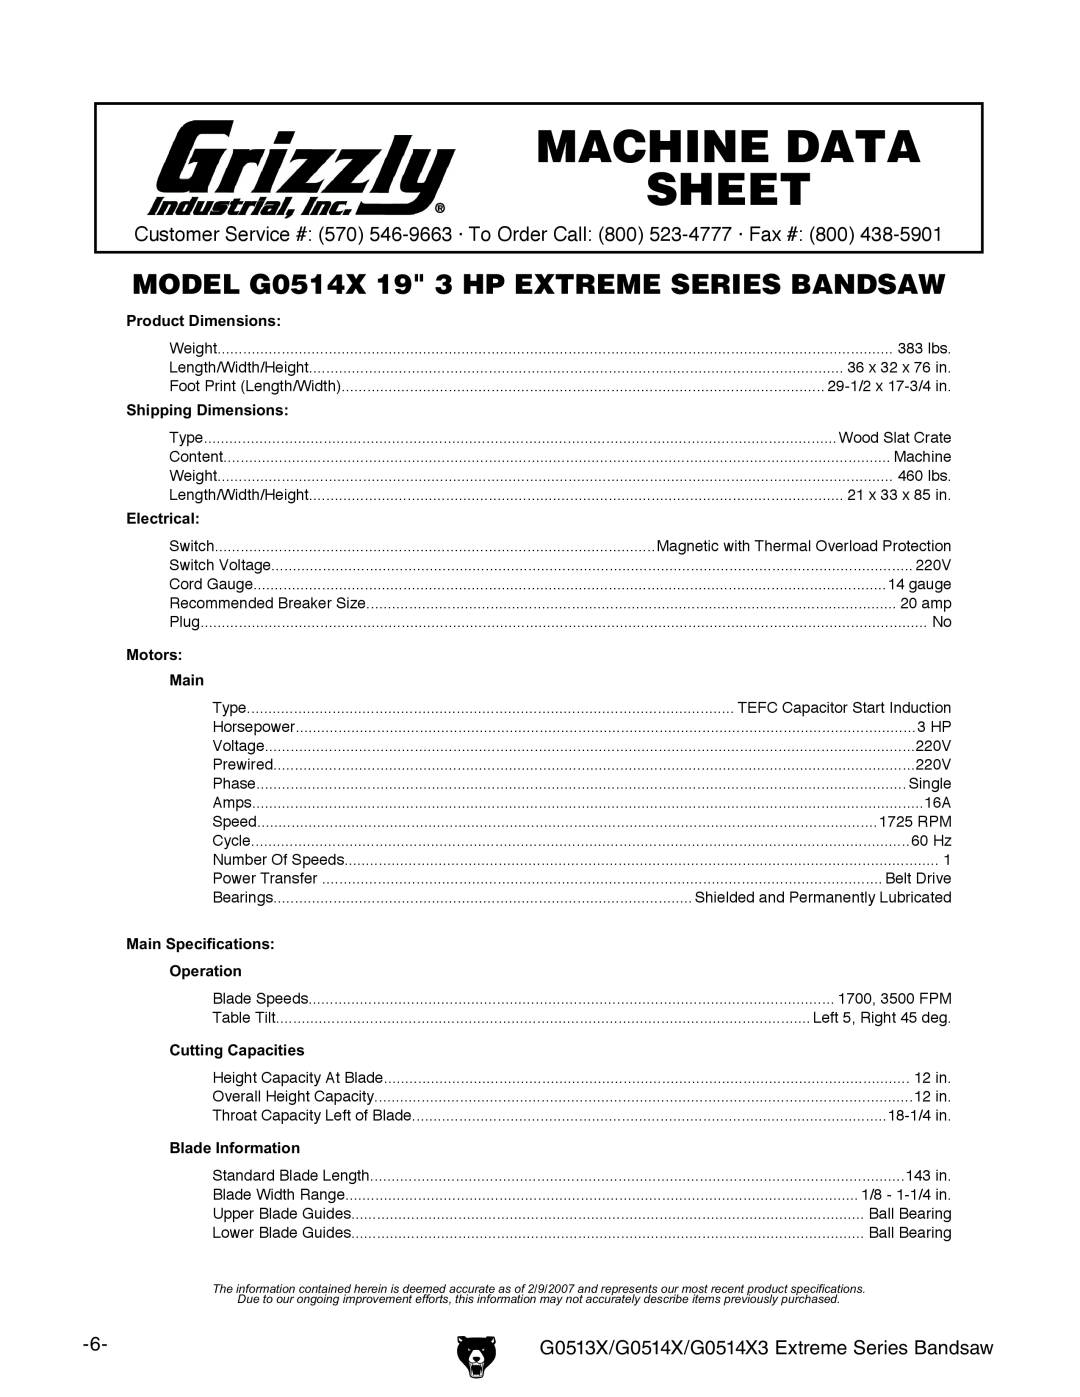 Grizzly G0514X3 G0514X Machine Data Sheet, MODEL G0514X 19 3 HP EXTREME SERIES BANDSAW, Product Dimensions, Electrical 